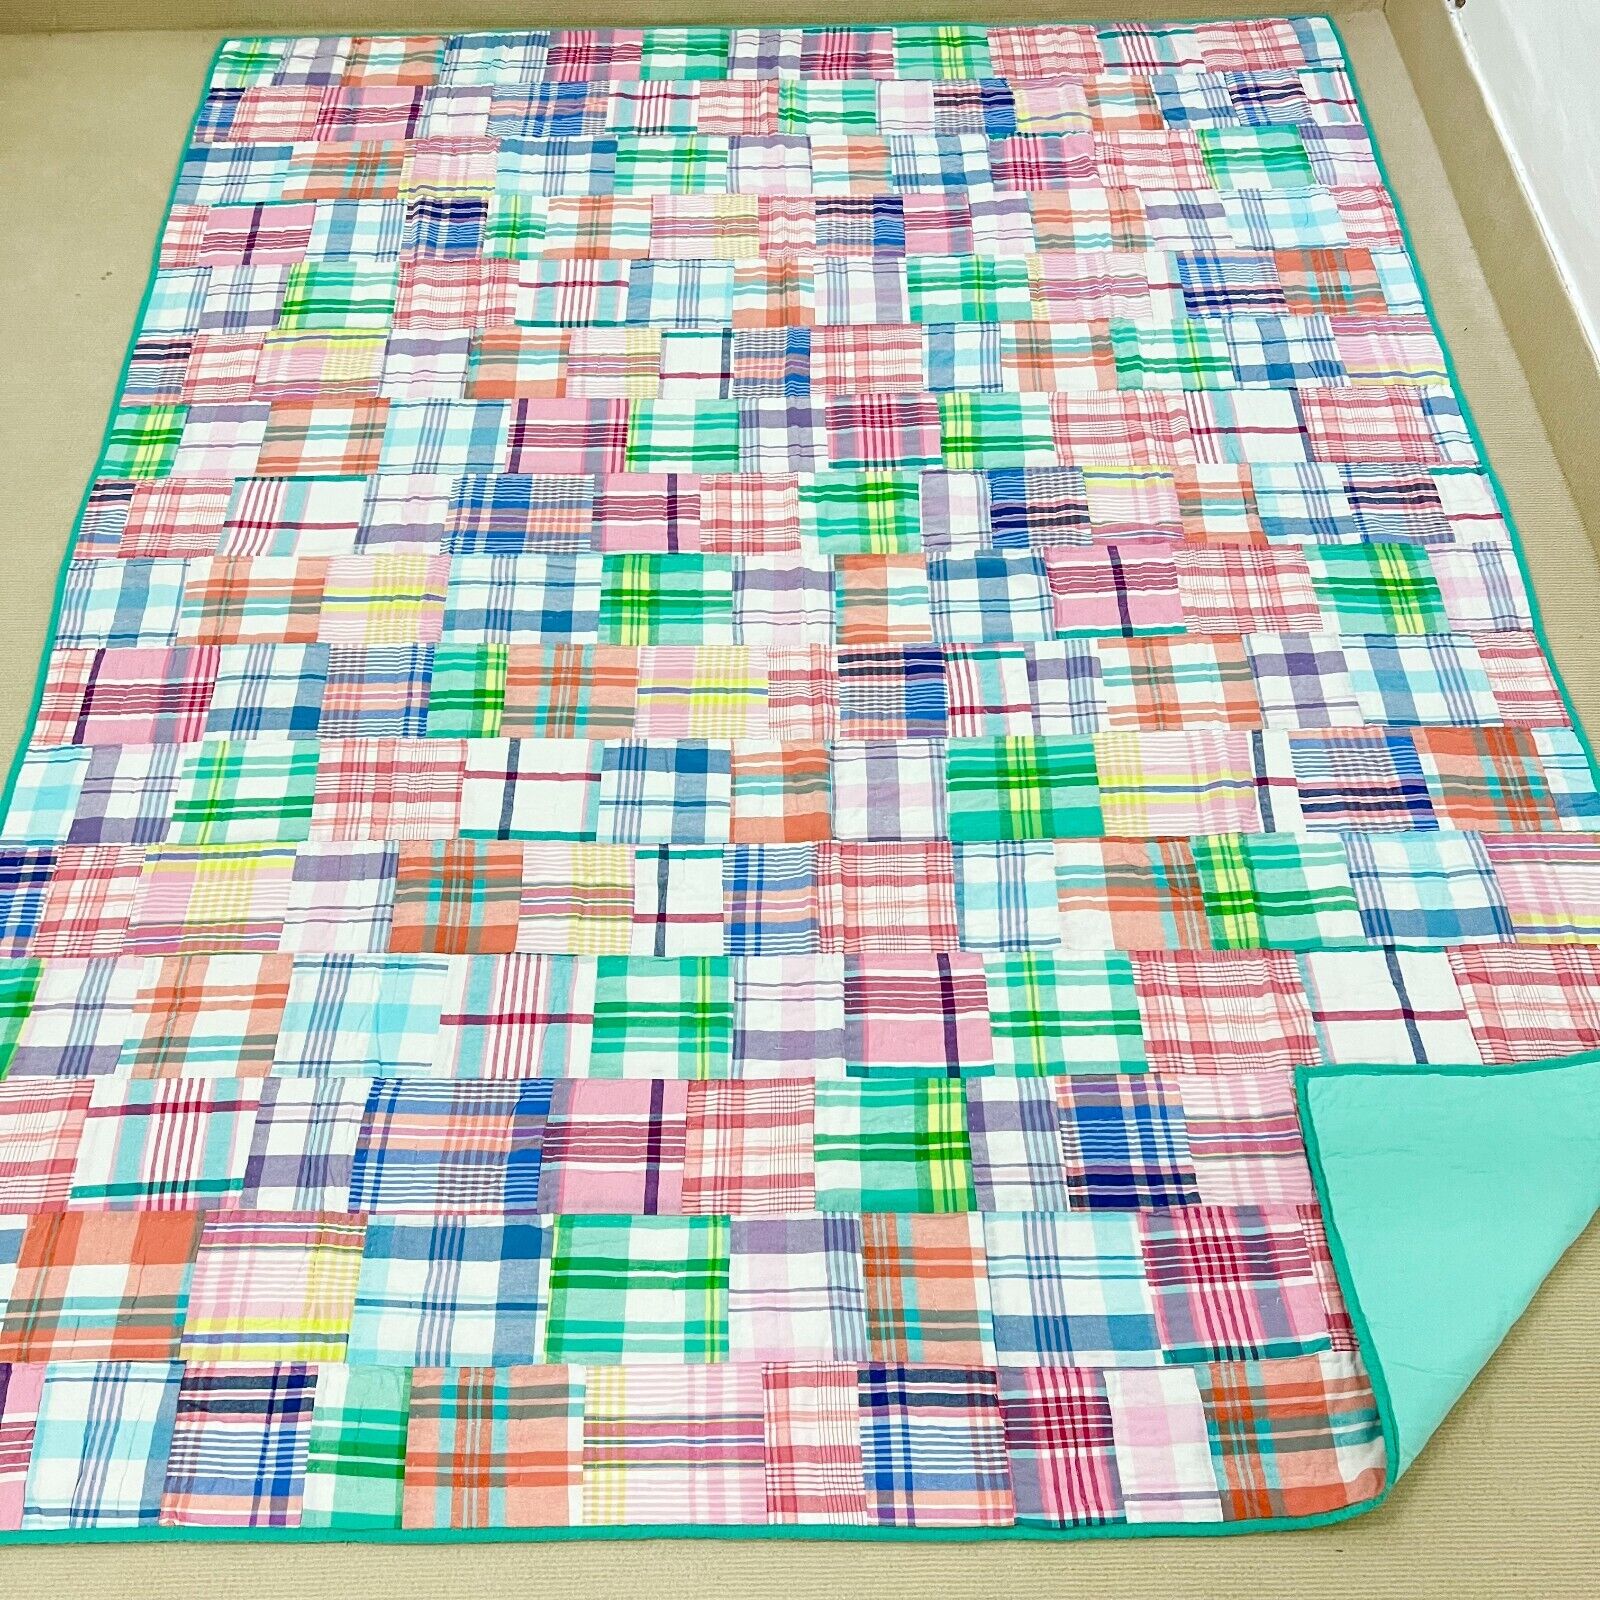 Handmade Madras Pink Plaid Patchwork Hand Stitched Twin Size Cotton QUILT 68x86”